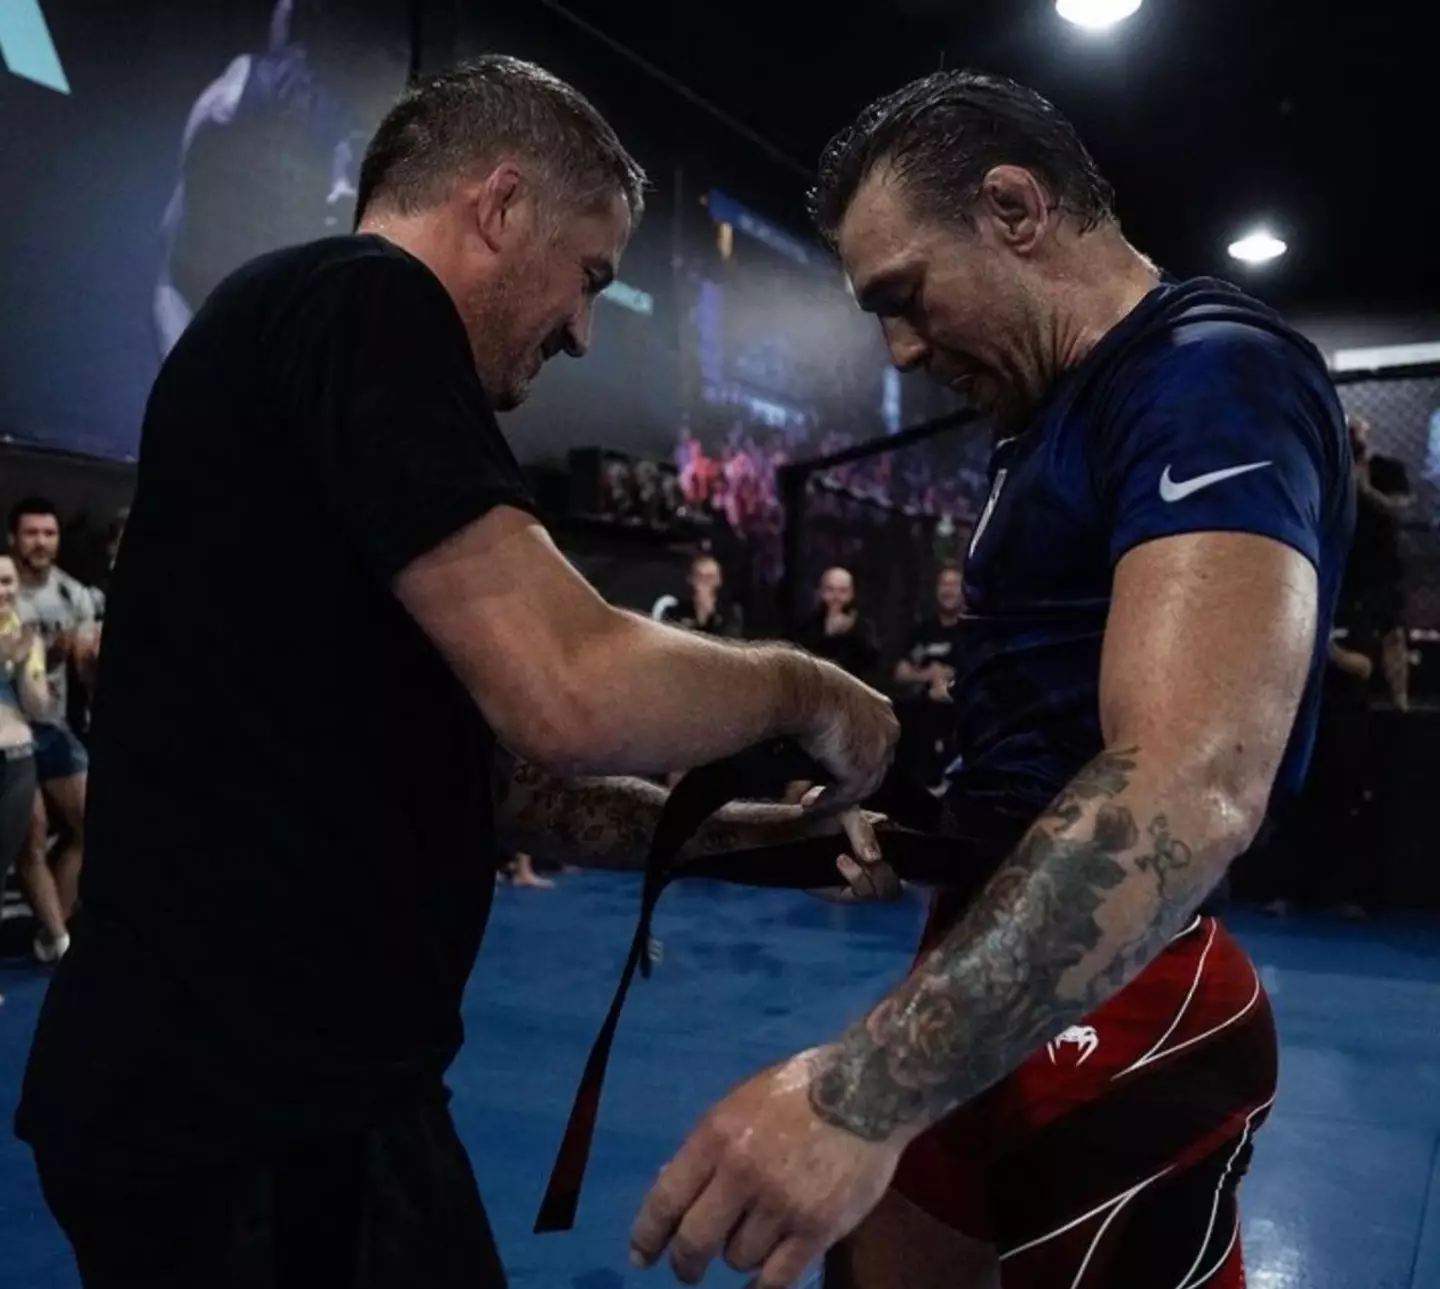 Conor McGregor received his black belt after 20 years.